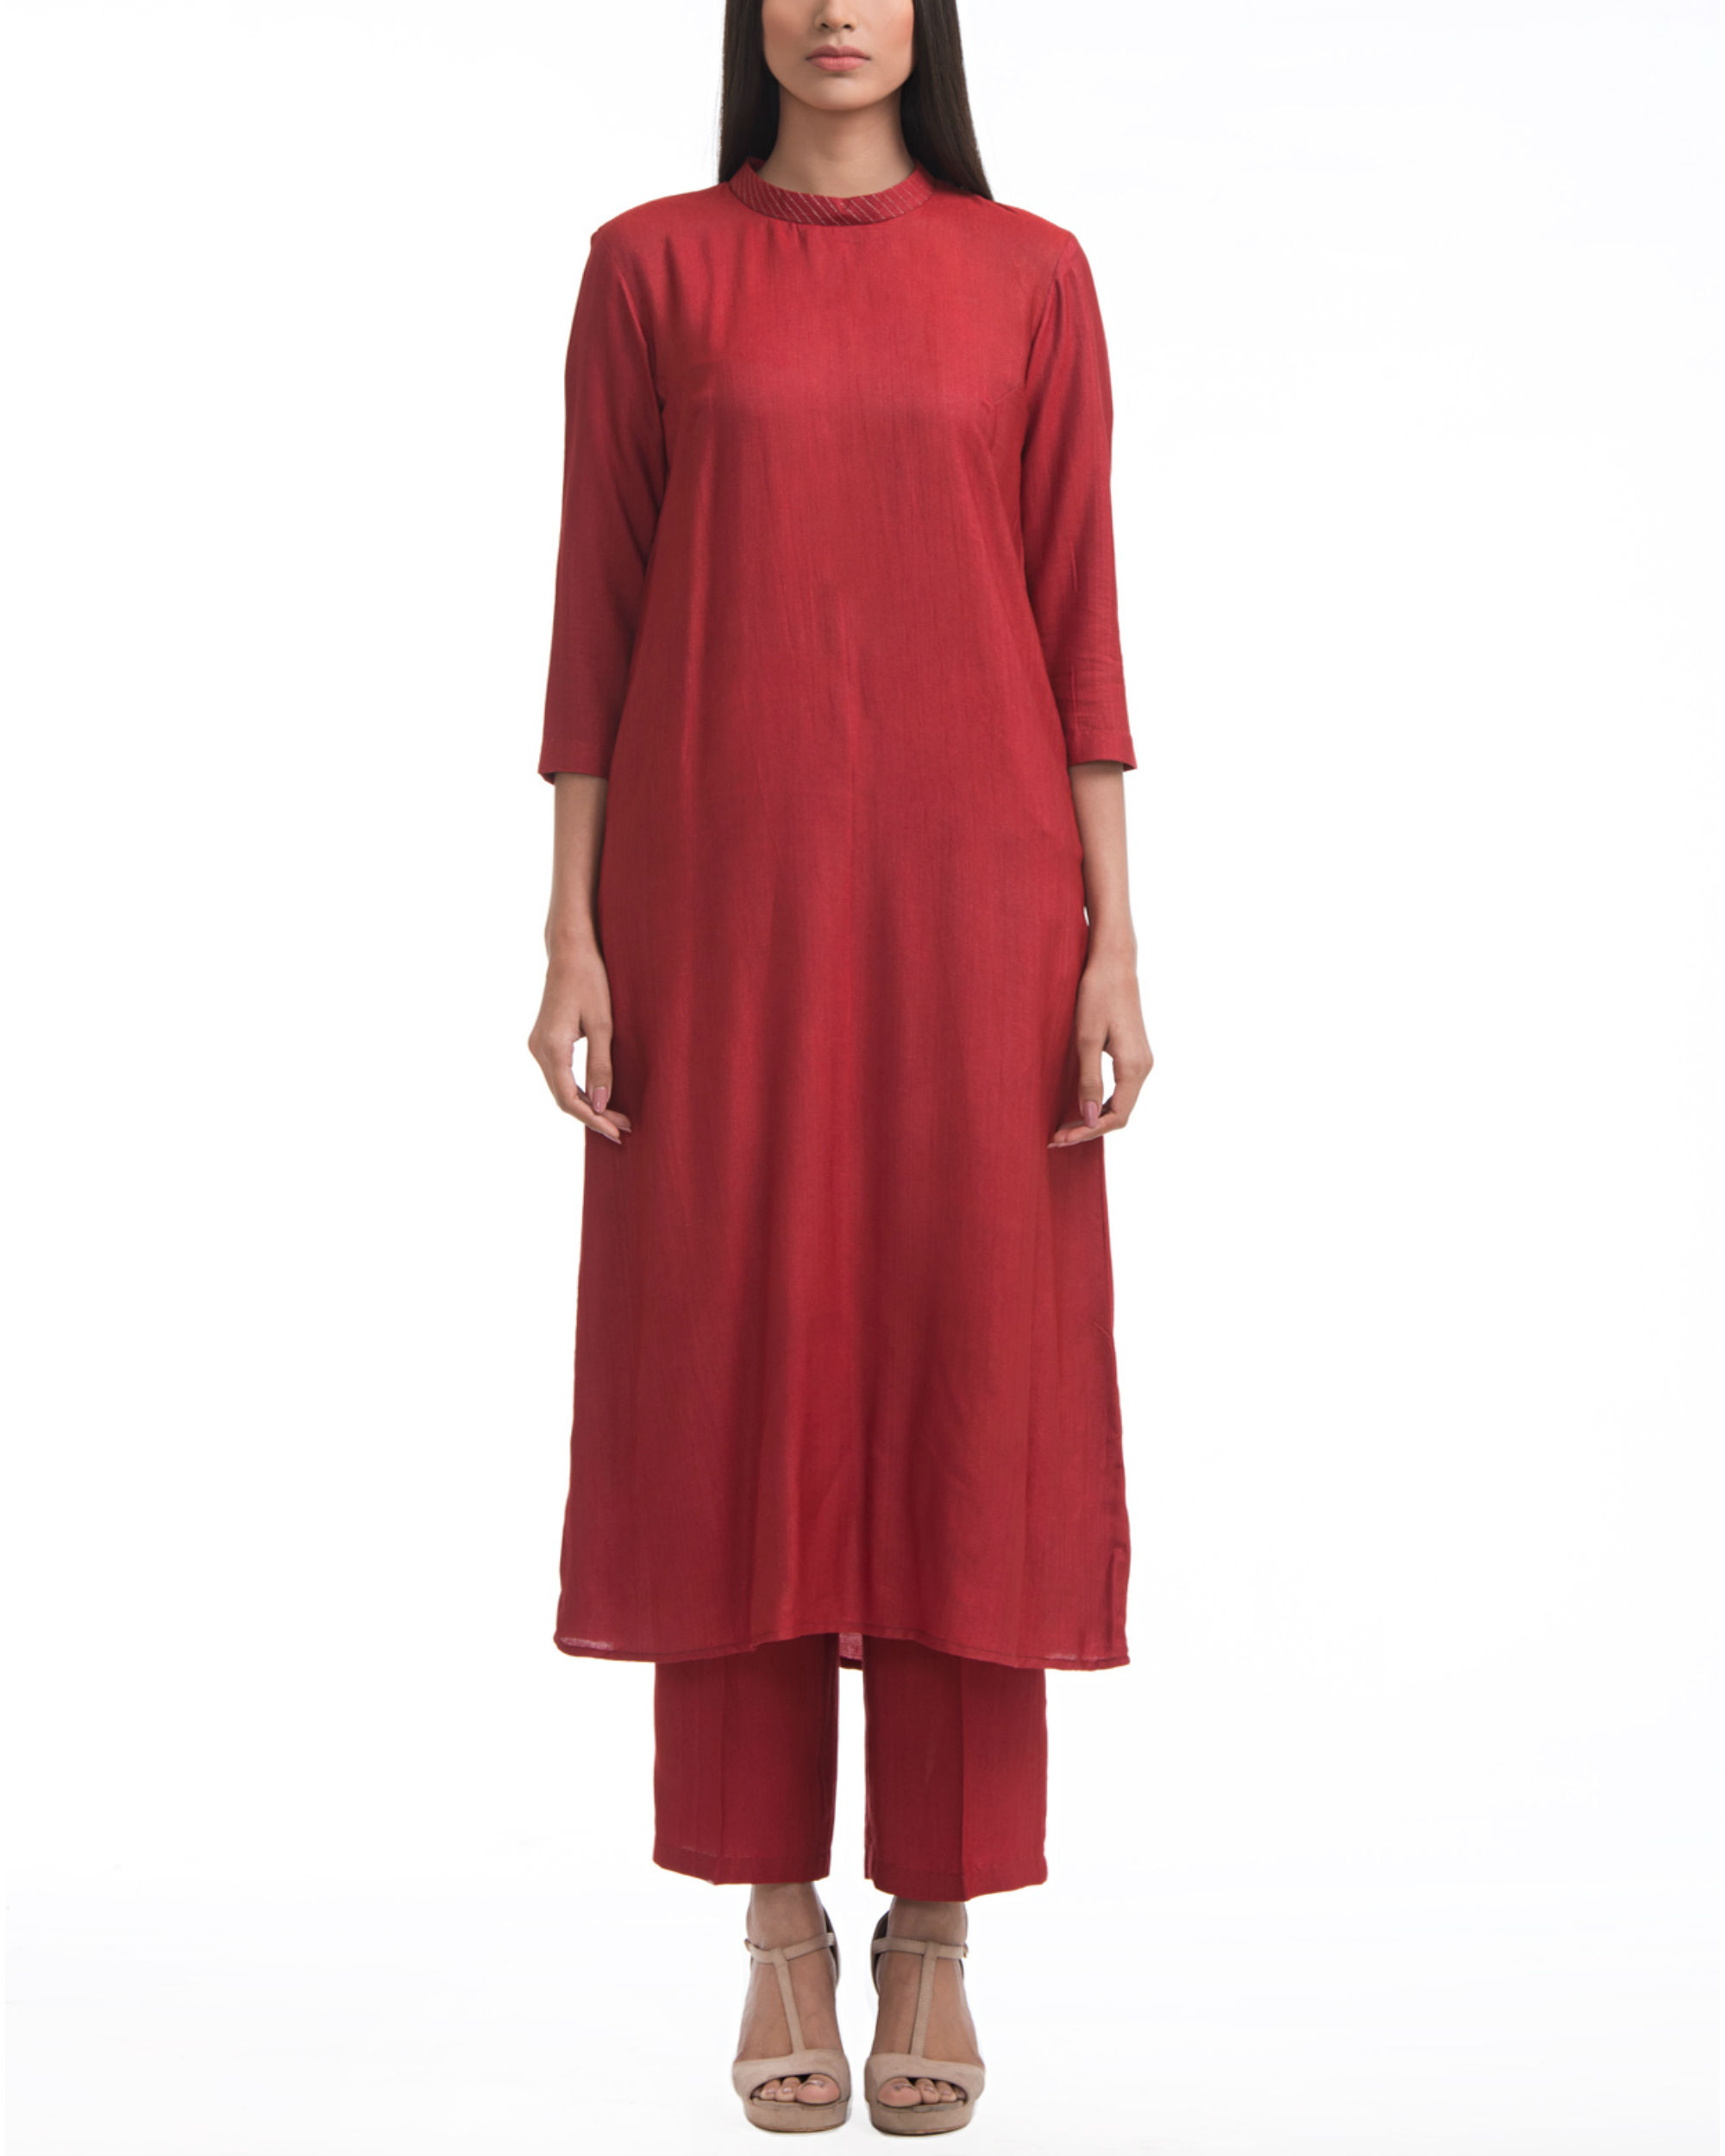 Maroon close neck tunic by ANS | The Secret Label